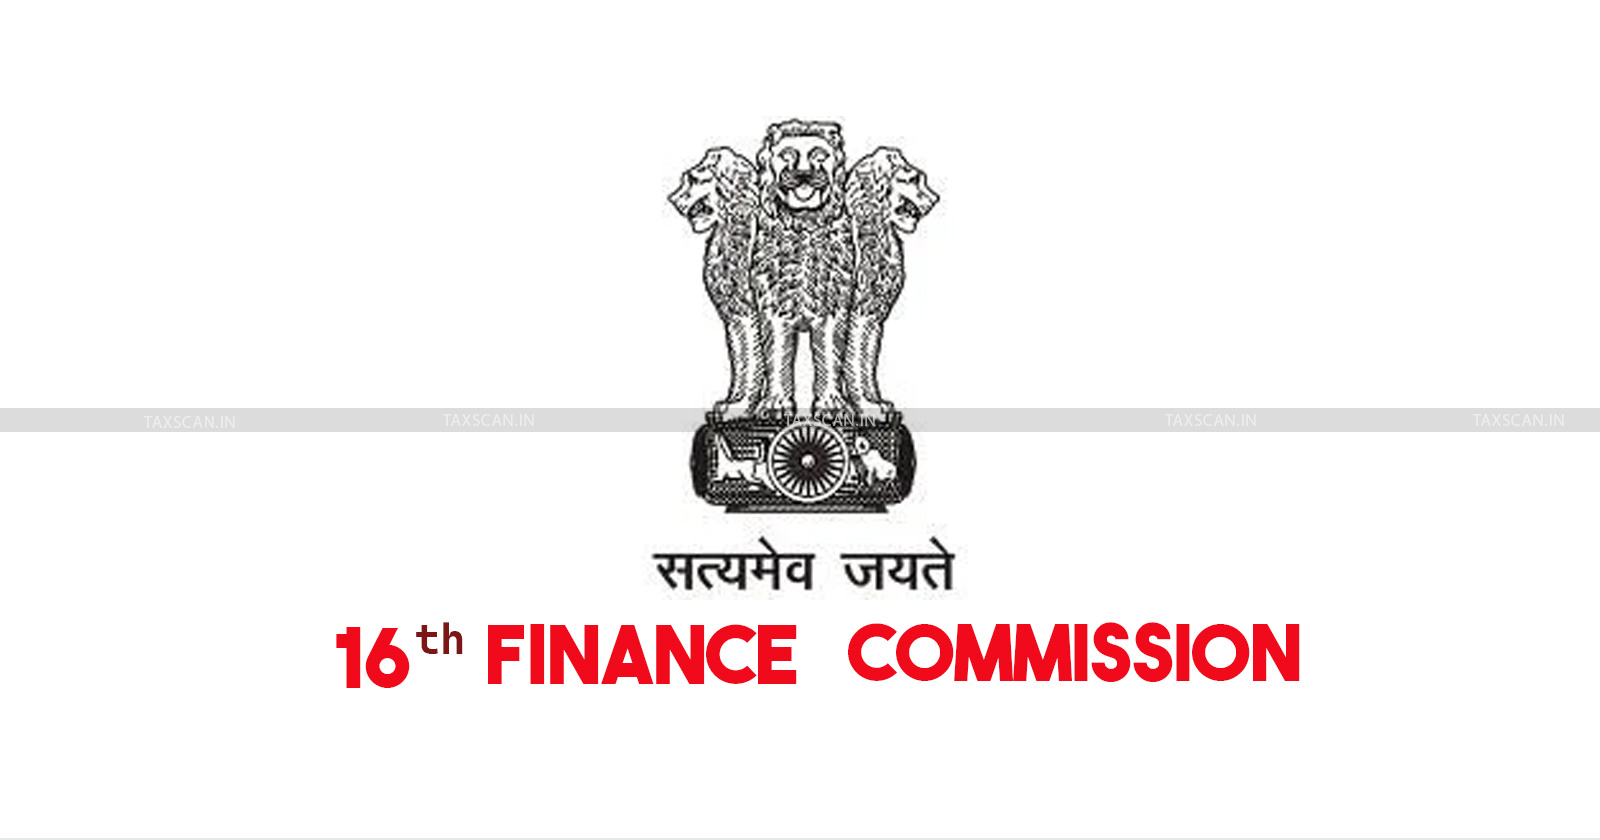 Central Govt appoints members - Sixteenth Finance Commission - taxscan